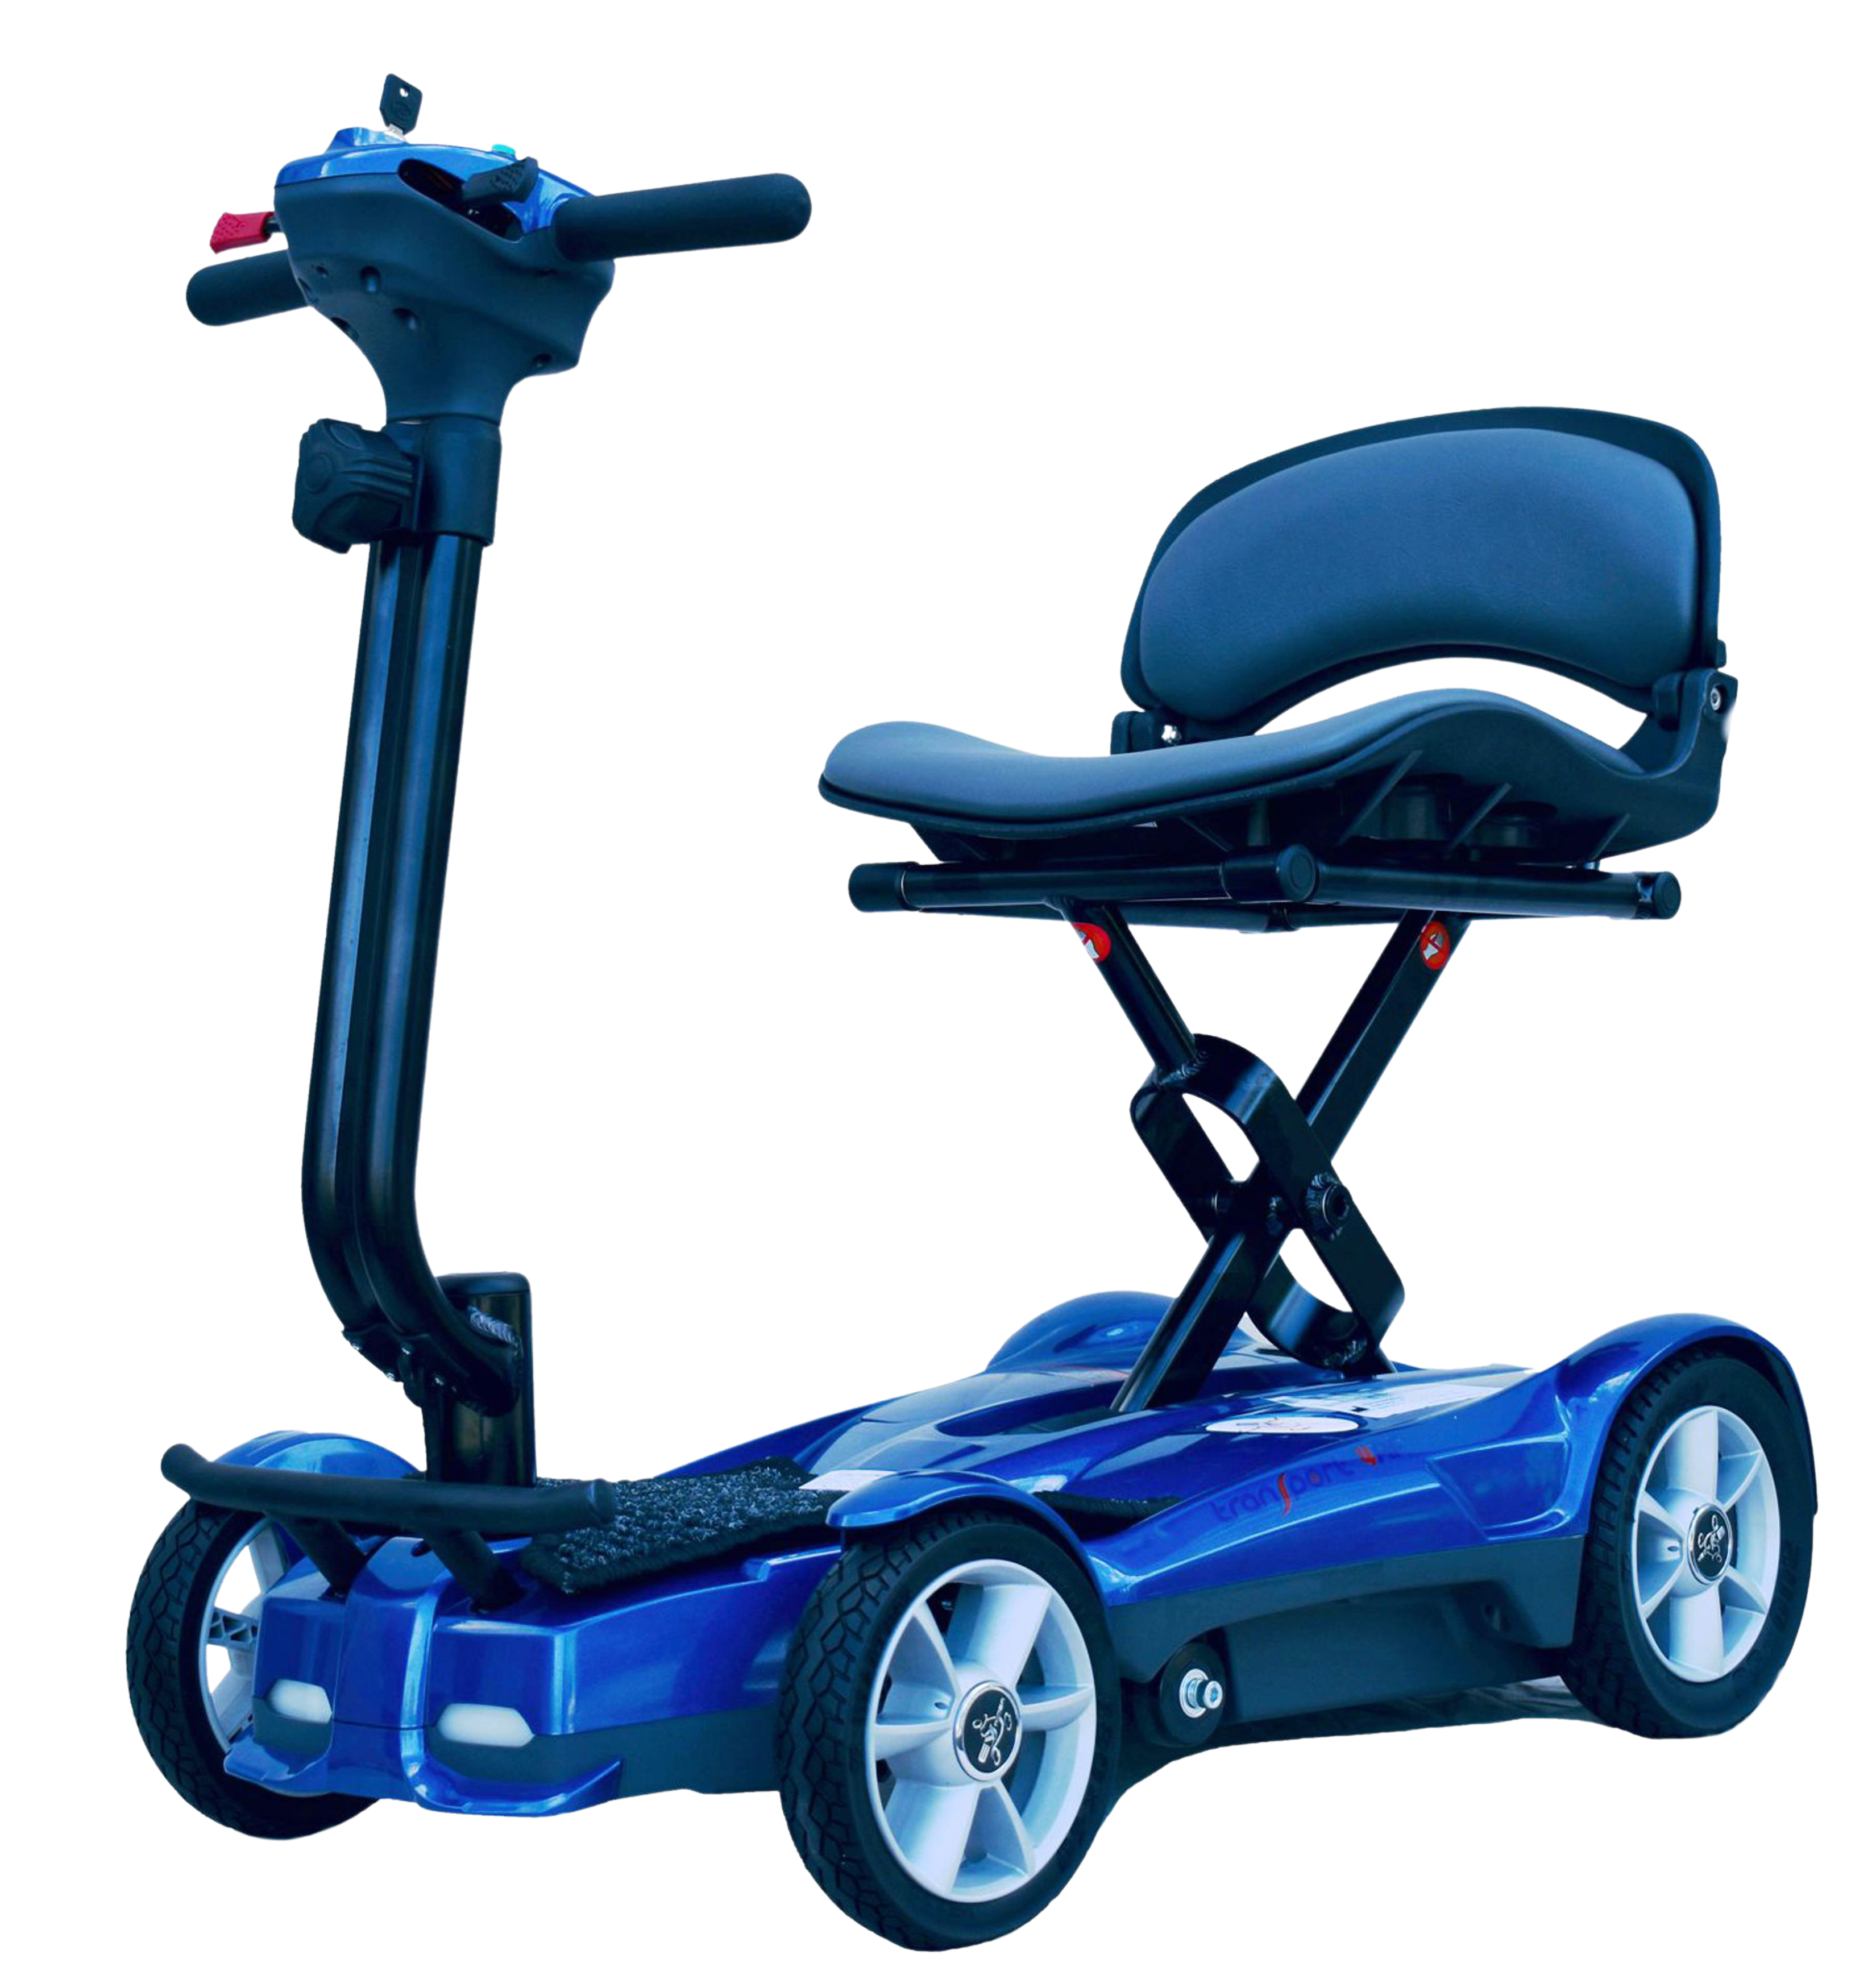 EV Rider S21F Transport AF4W Folding Mobility Scooter Sapphire Blue Open Box